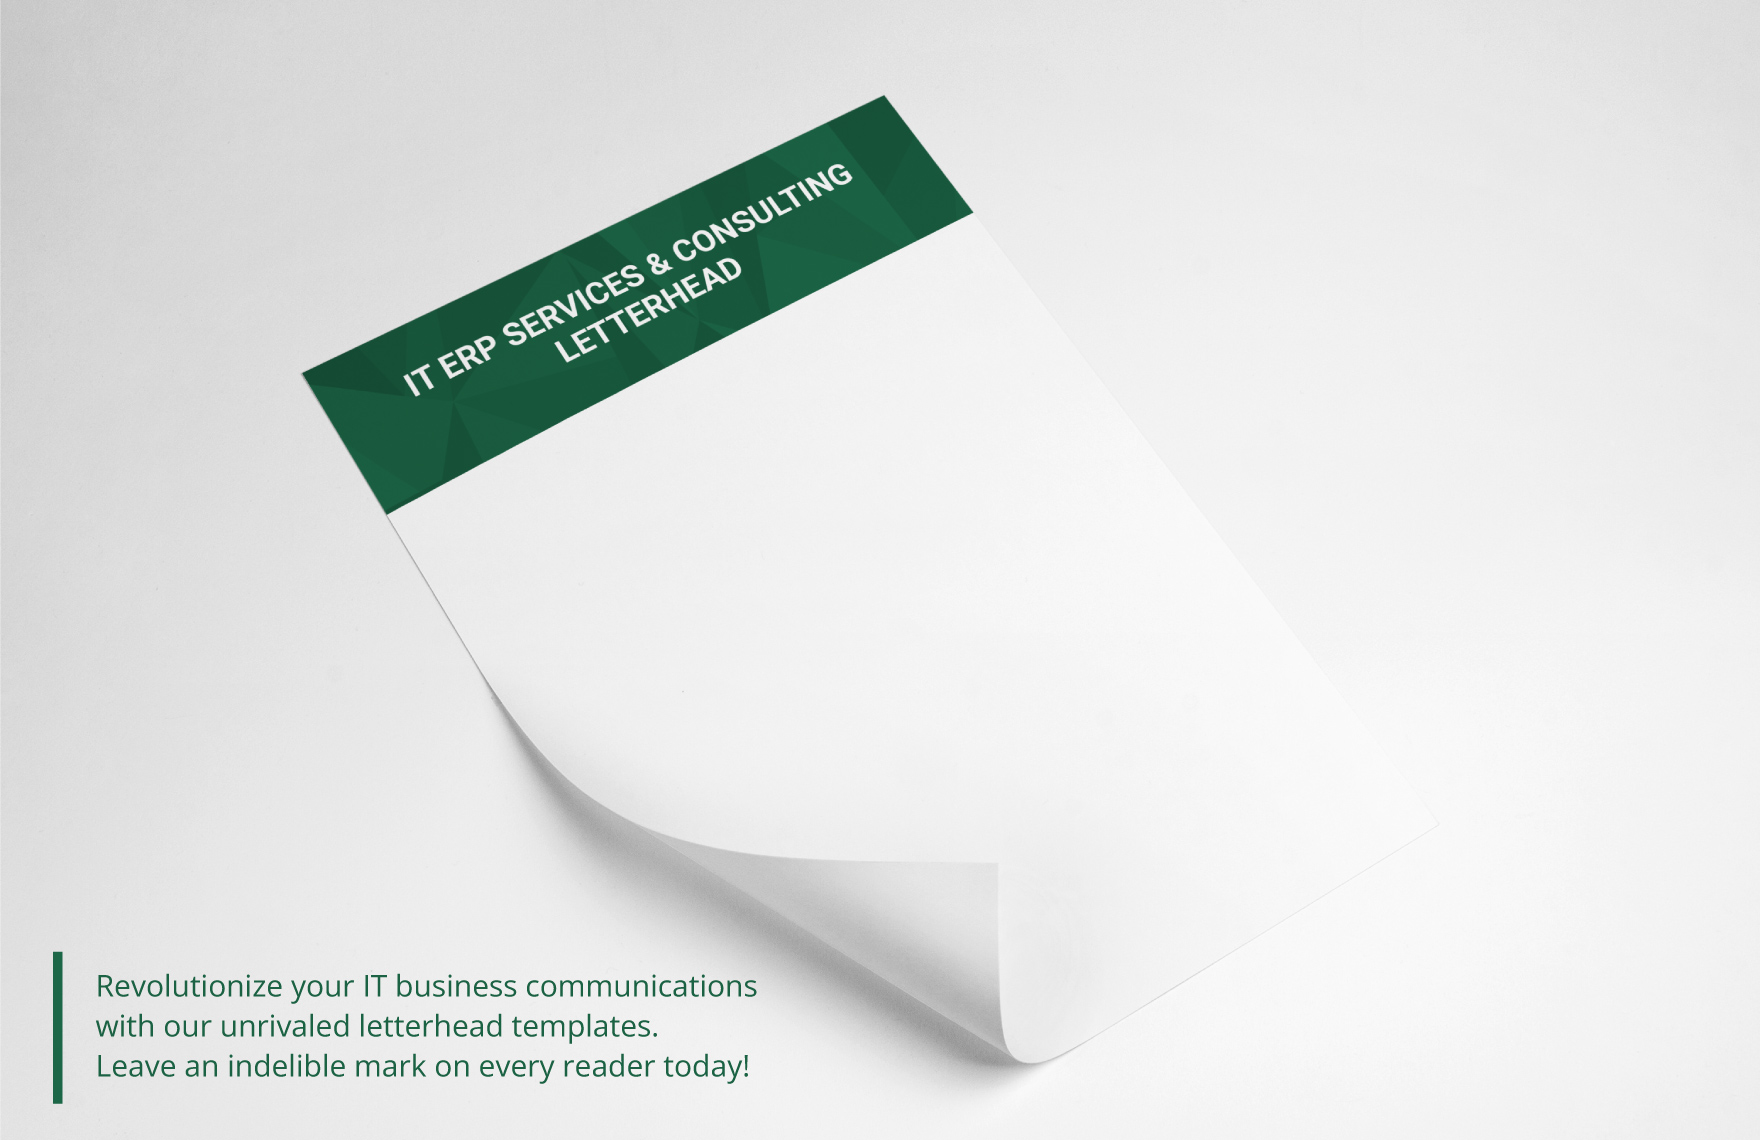 IT ERP Services & Consulting Letterhead Template